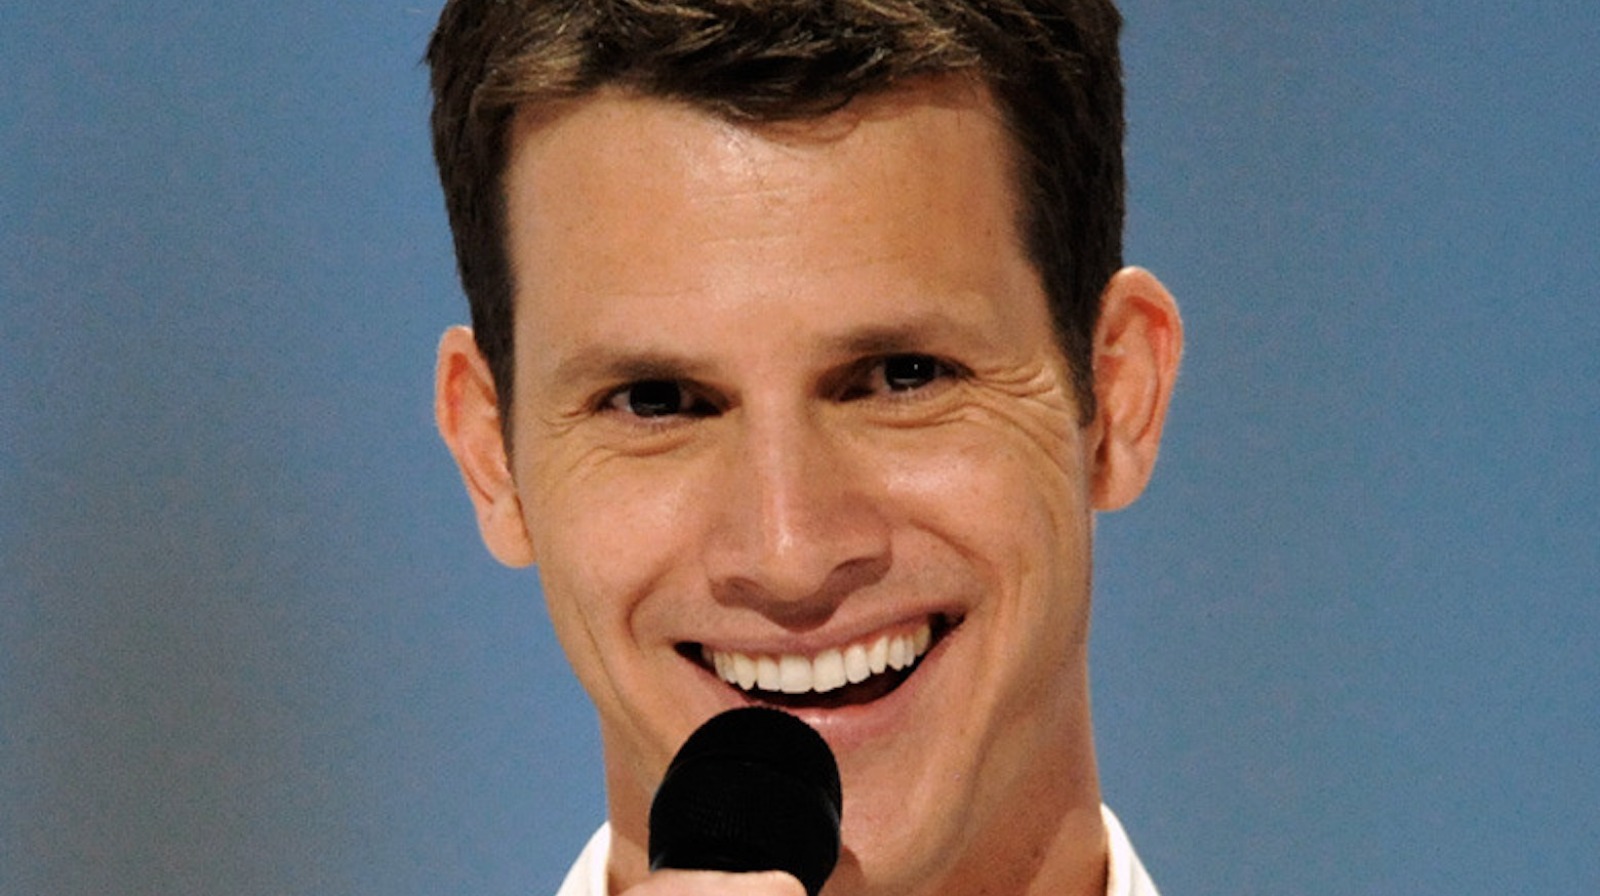 Daniel Tosh's Net Worth The Comedian Is Worth More Than You Think